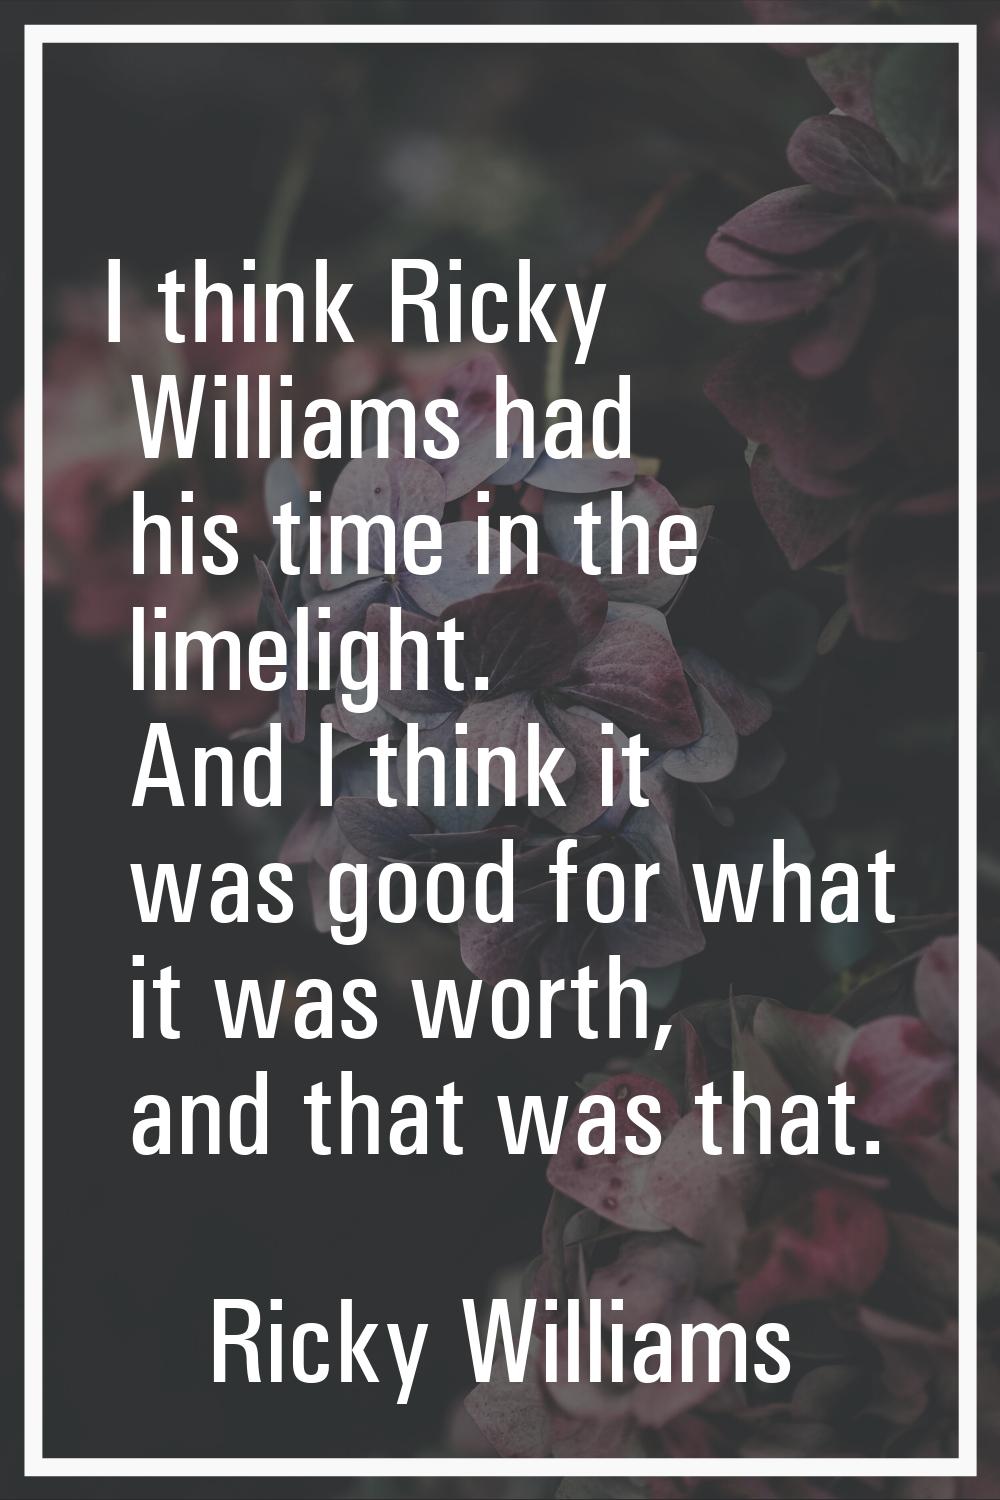 I think Ricky Williams had his time in the limelight. And I think it was good for what it was worth